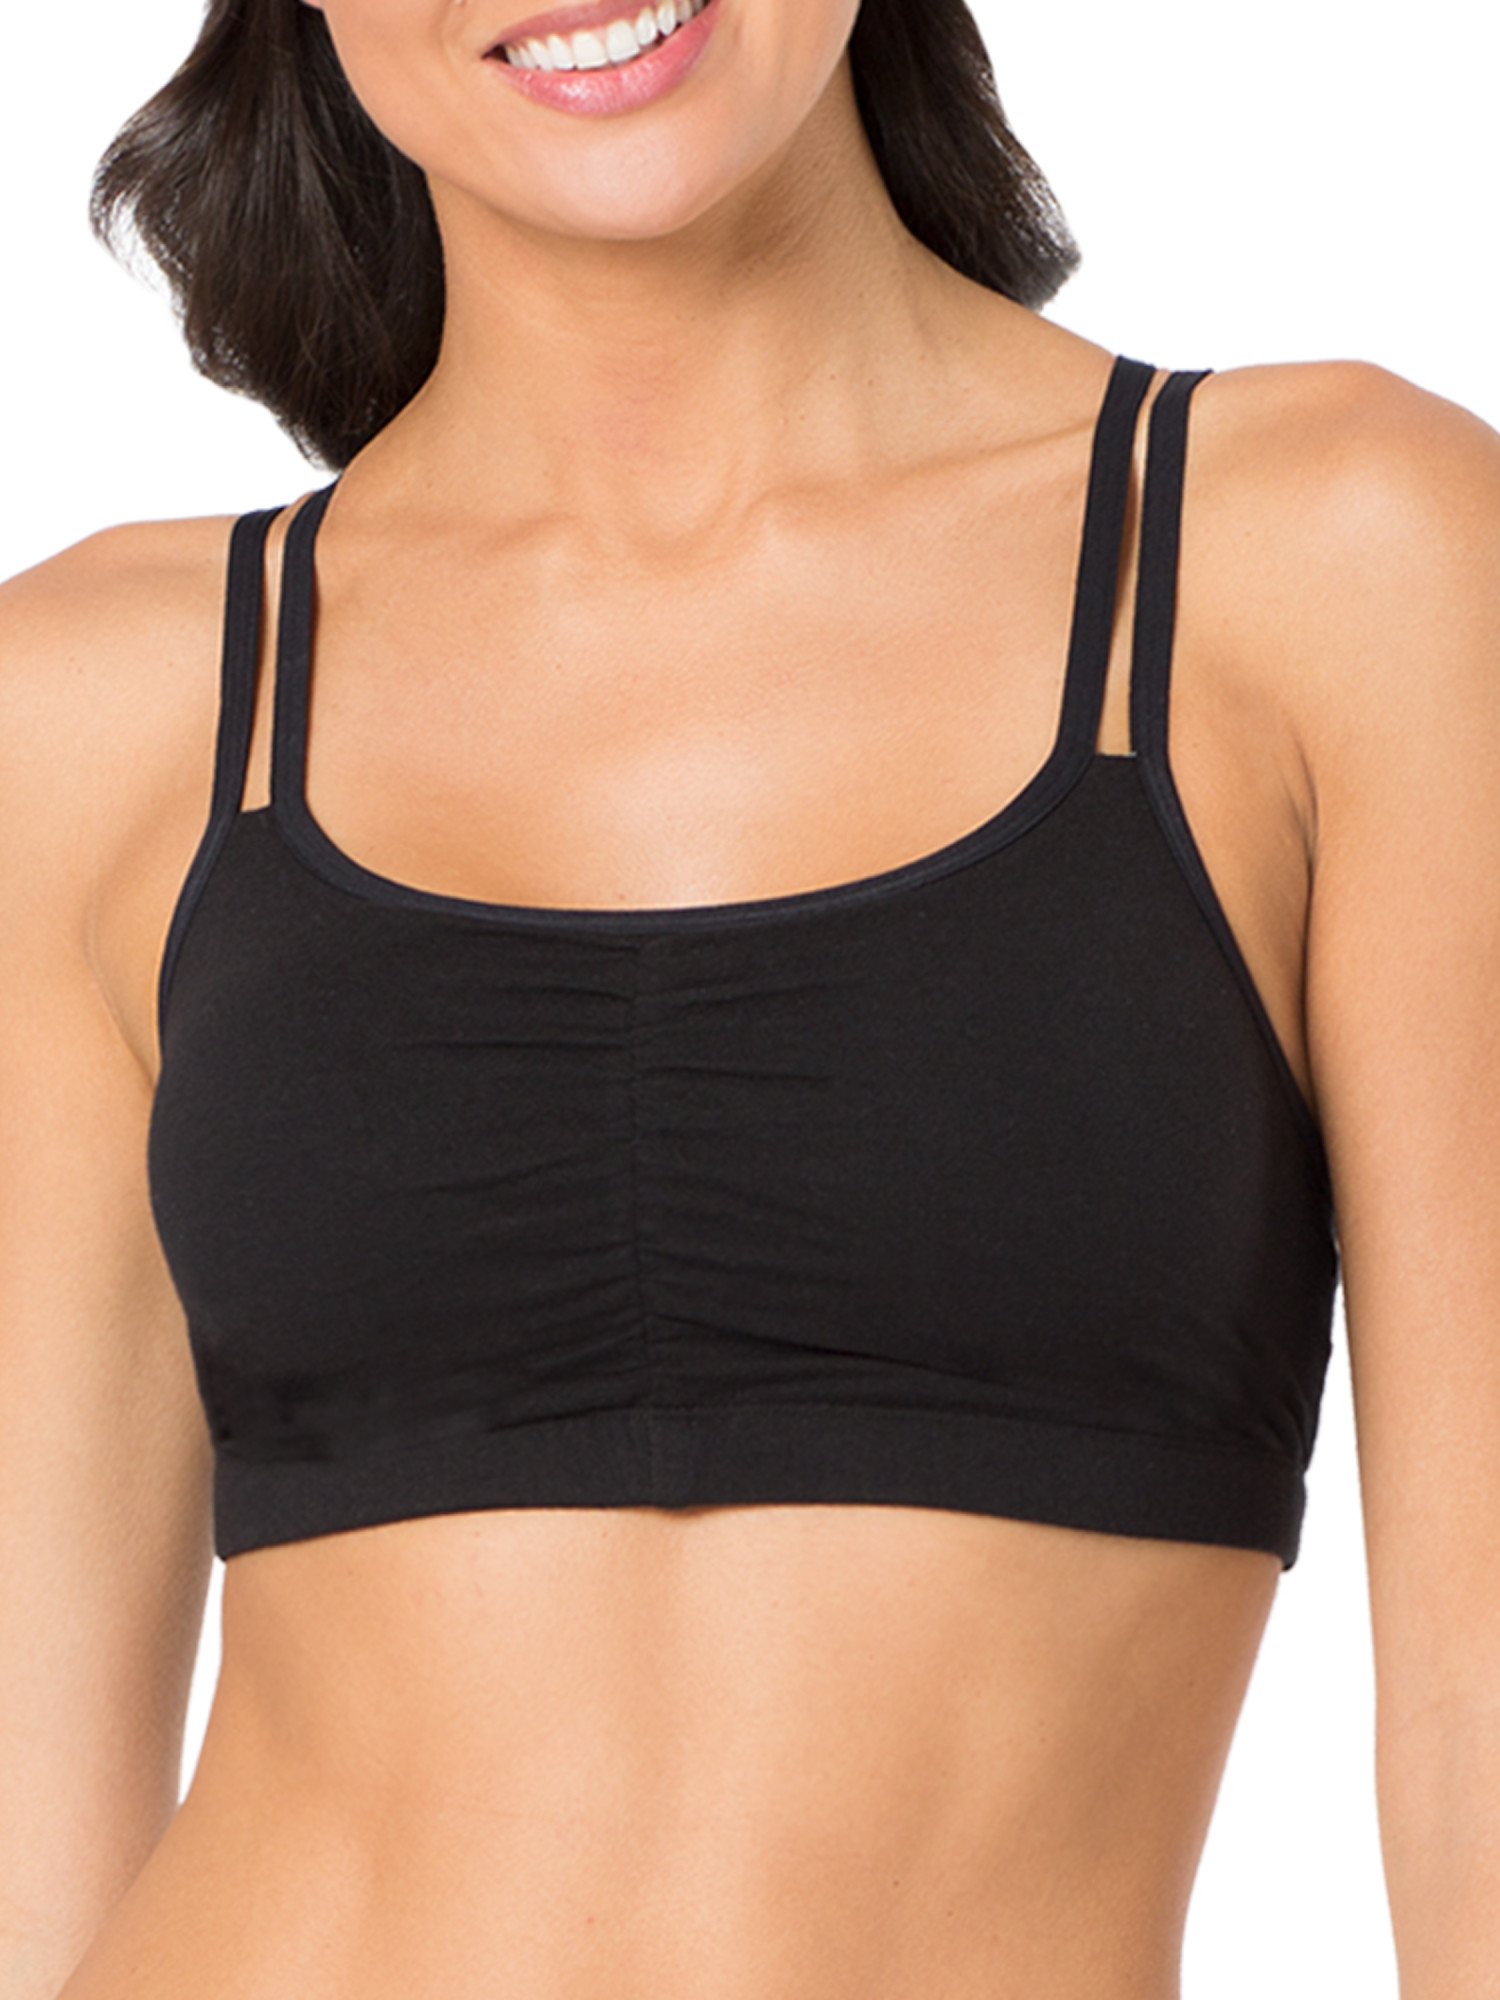 Fruit of the Loom Women's Spaghetti Strap Cotton Sports Bra, 3-Pack, Style-9036 - image 5 of 8